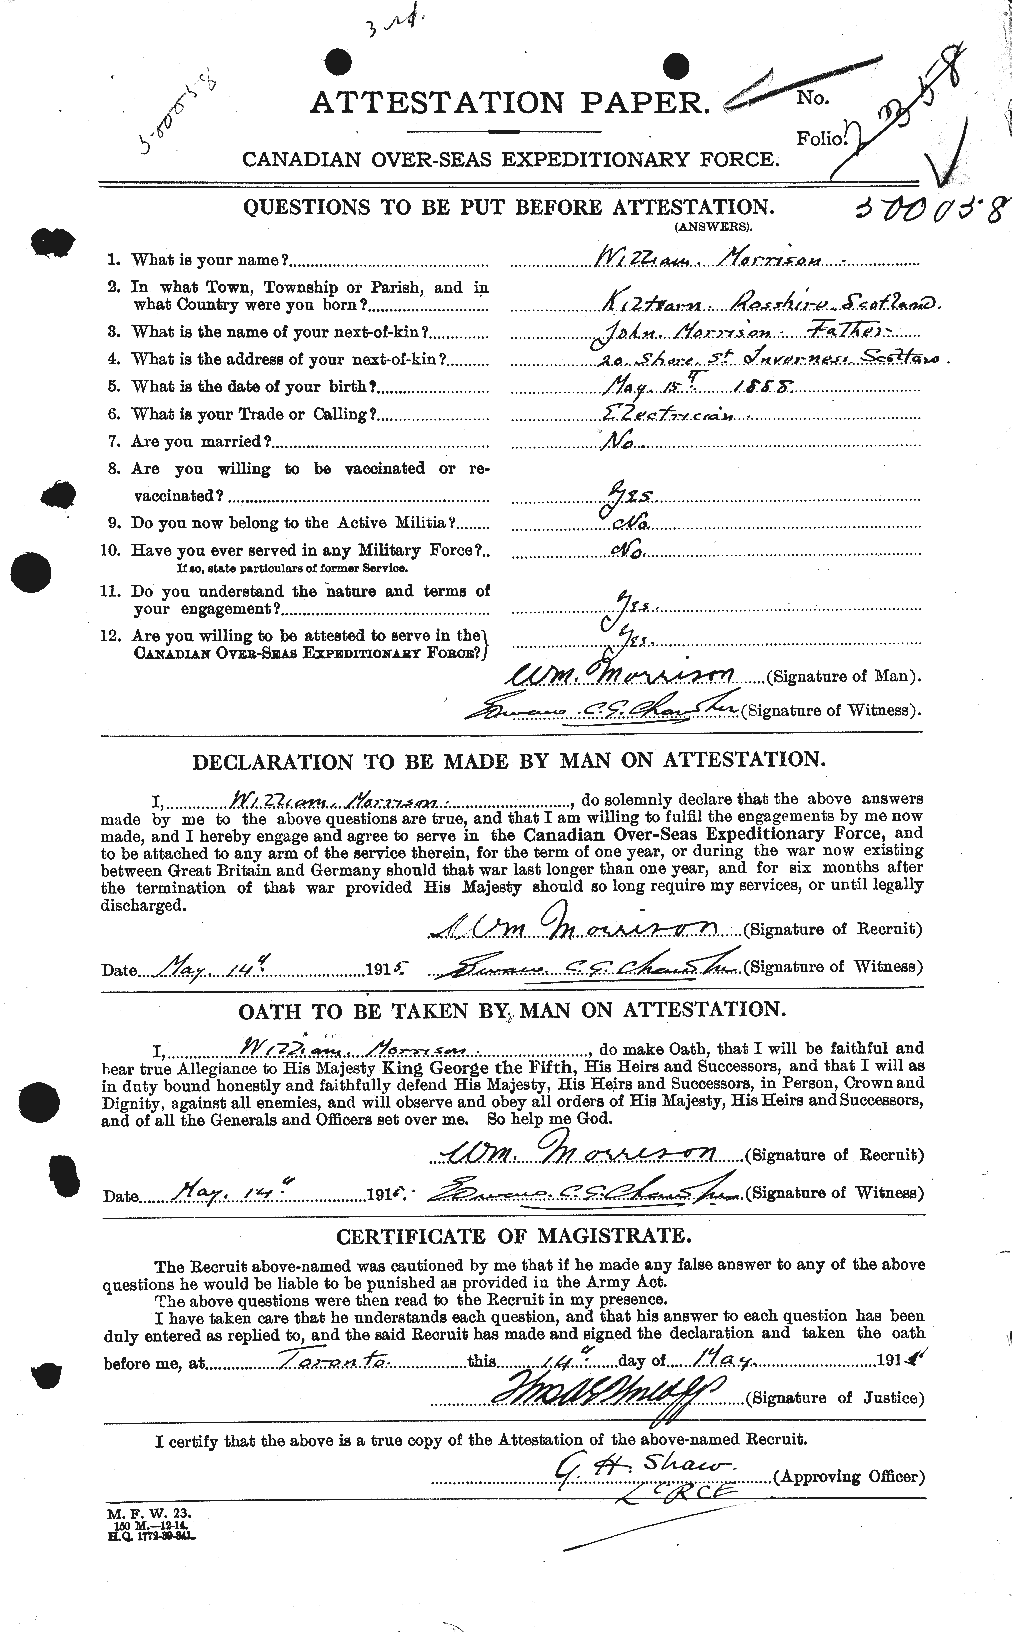 Personnel Records of the First World War - CEF 509241a